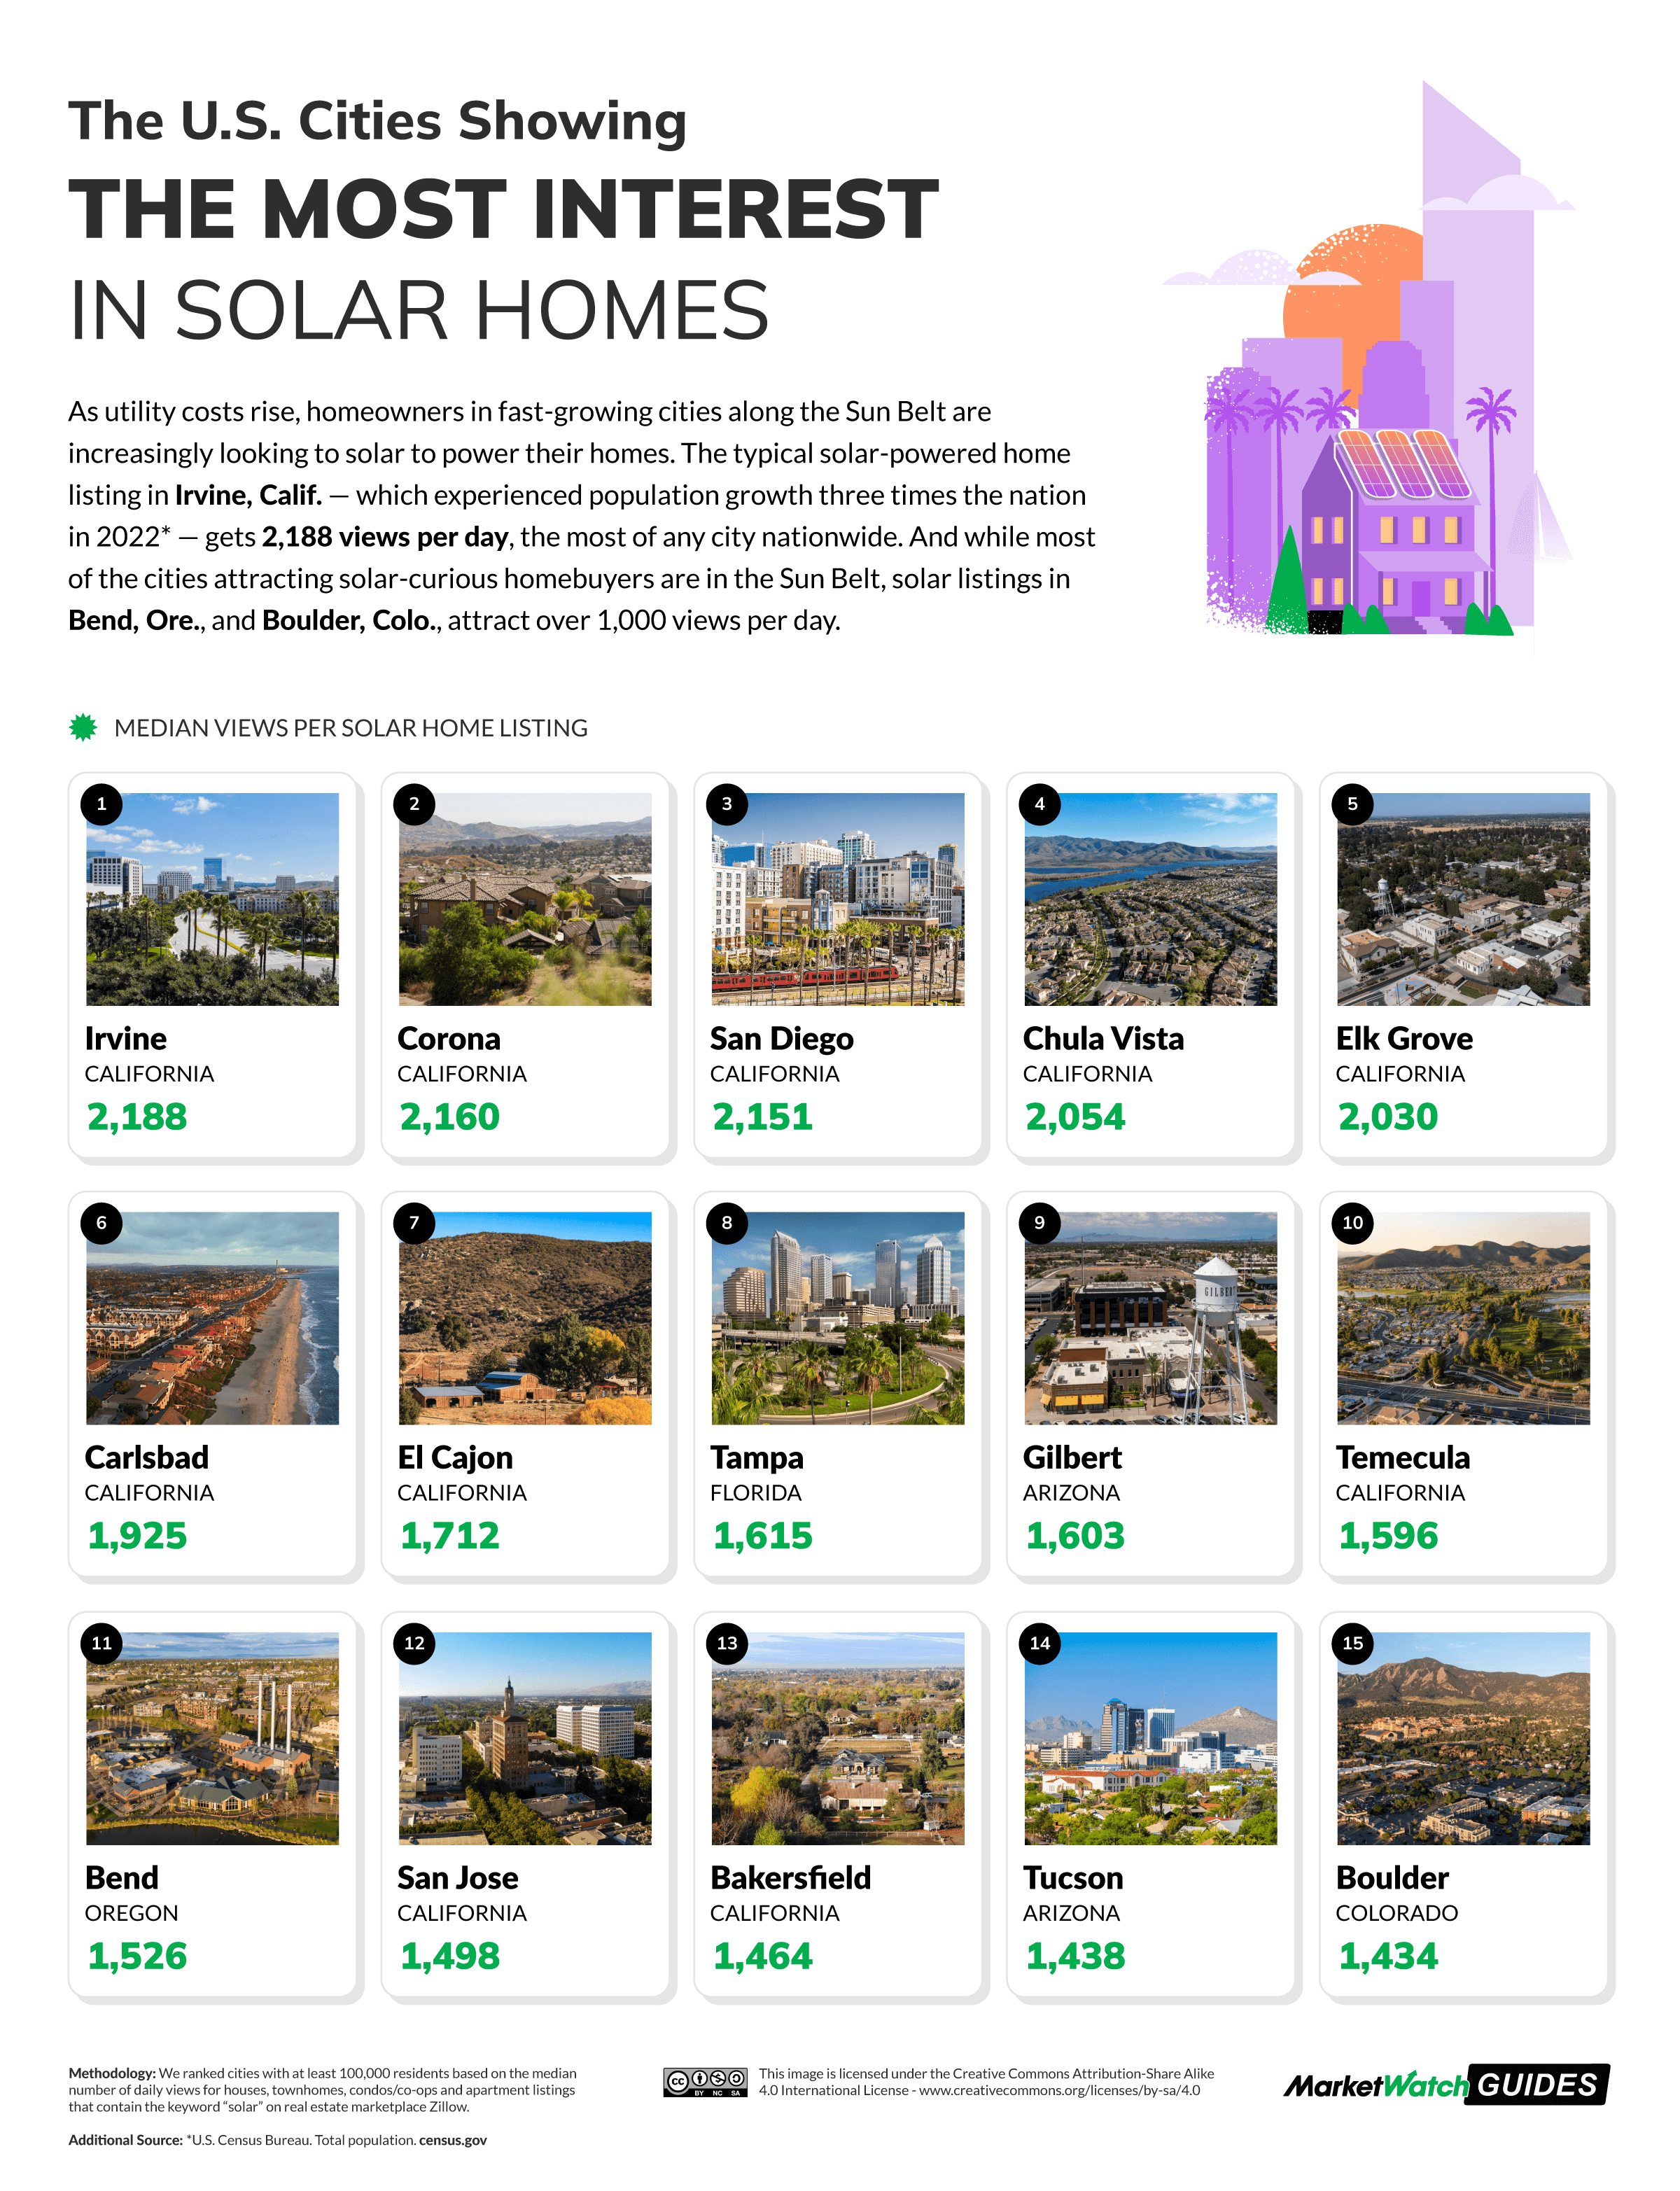 The U.S. Cities Showing the Most Interest in Solar Homes